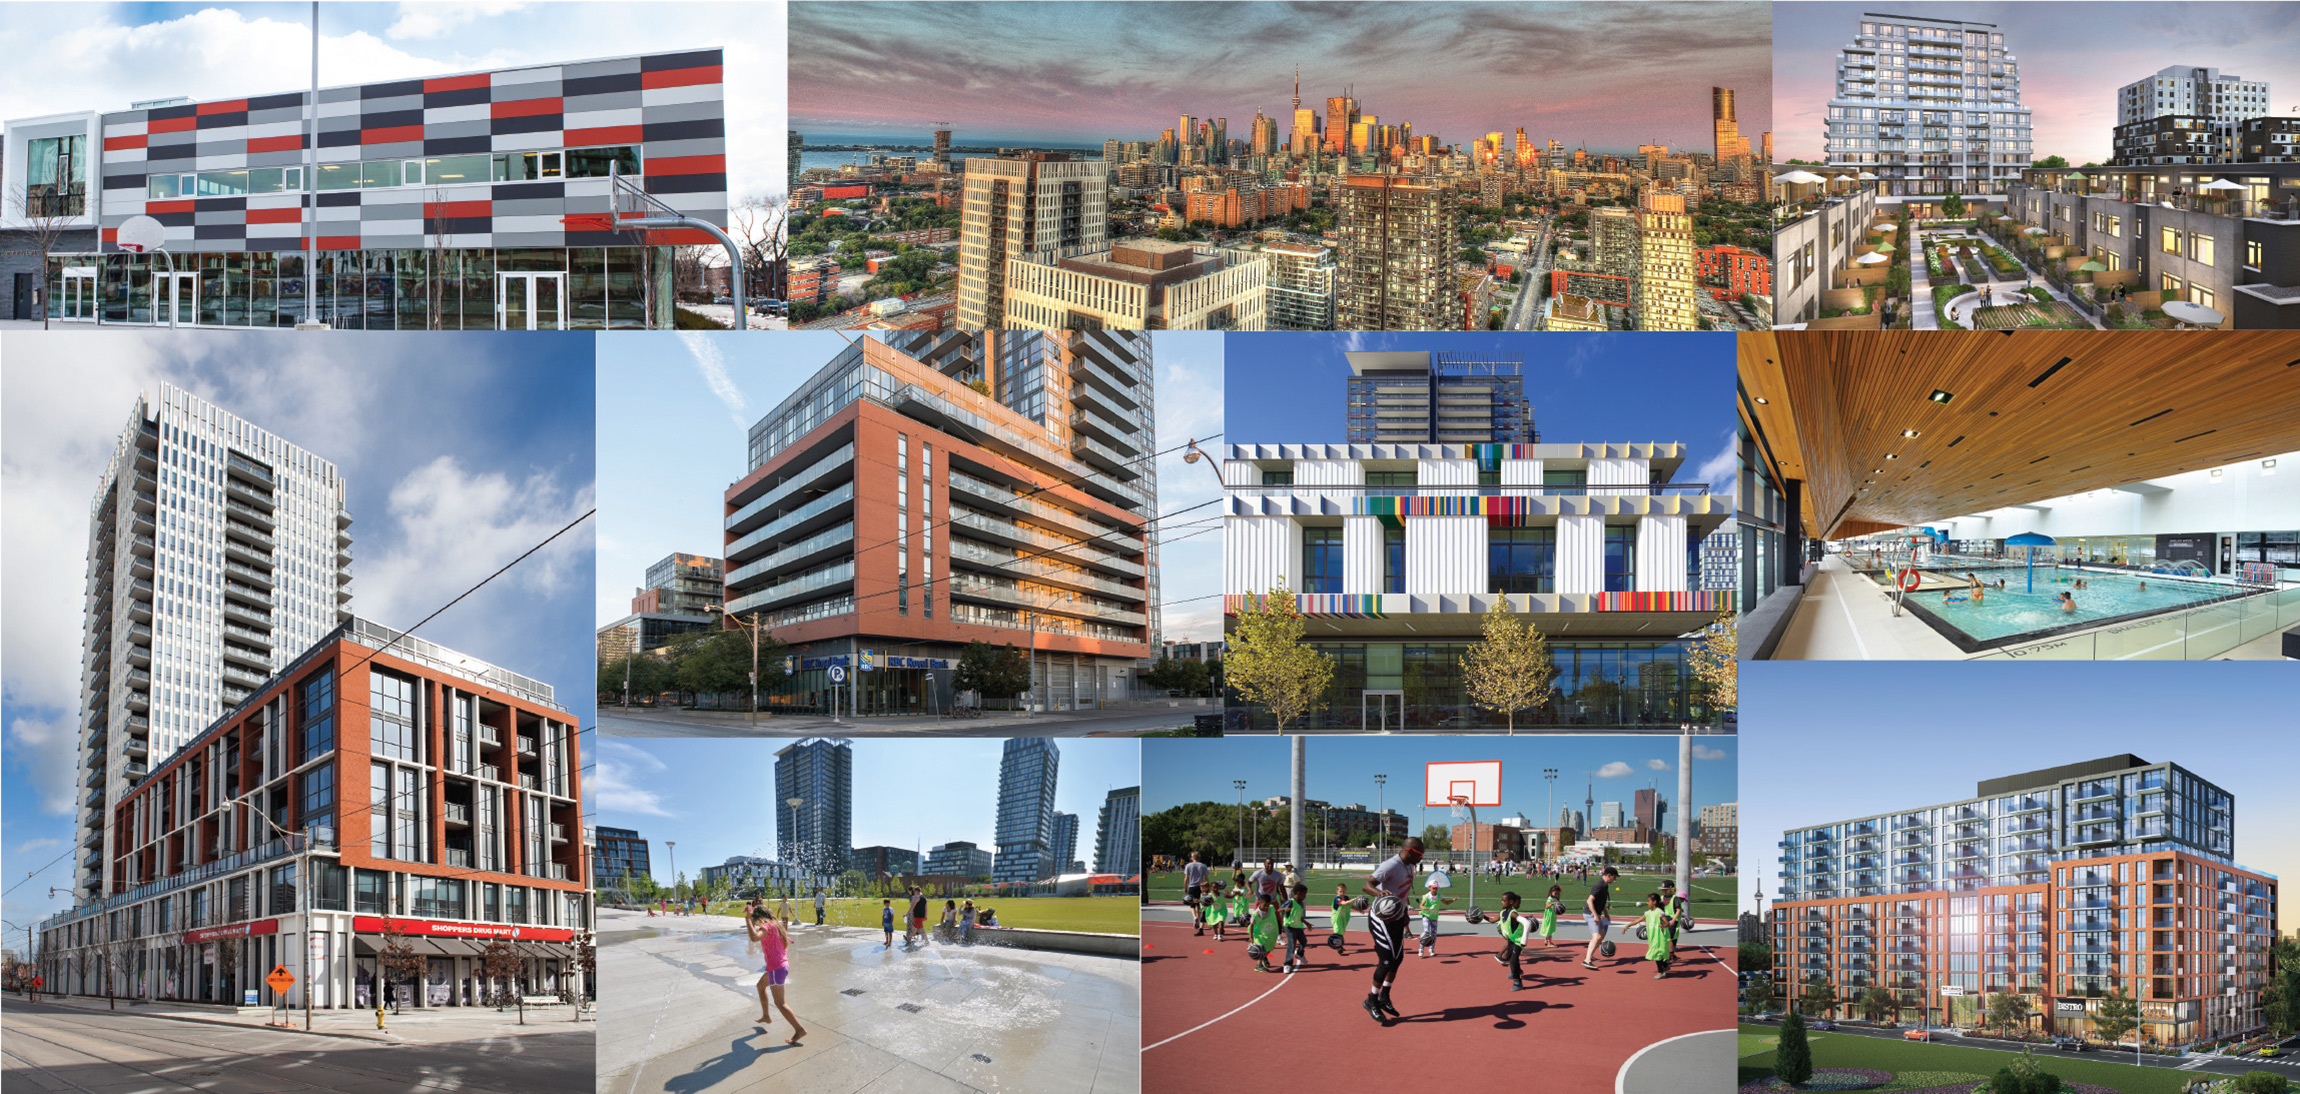 A collage of images from Regent Park. Includes the Aquatic Centre, Regent Park Community Centre, kids playing basketball, Daniels Spectrum, kids playing in a fountain